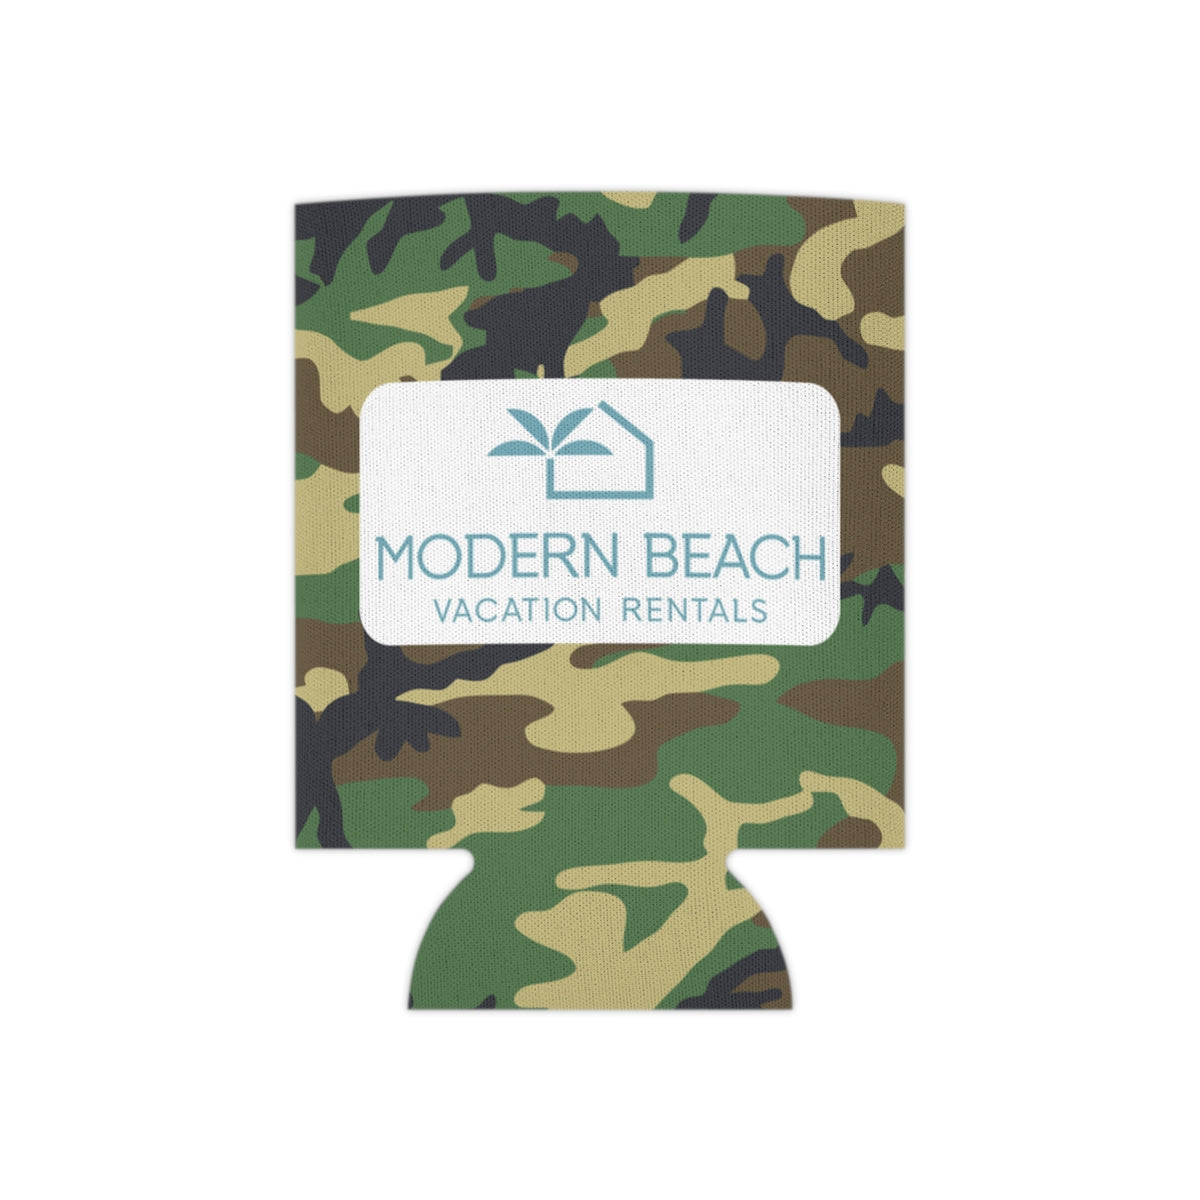 Modern Beach Vacation Rentals White Rectangle Logo Camouflage BDU Can Coozie Cooler